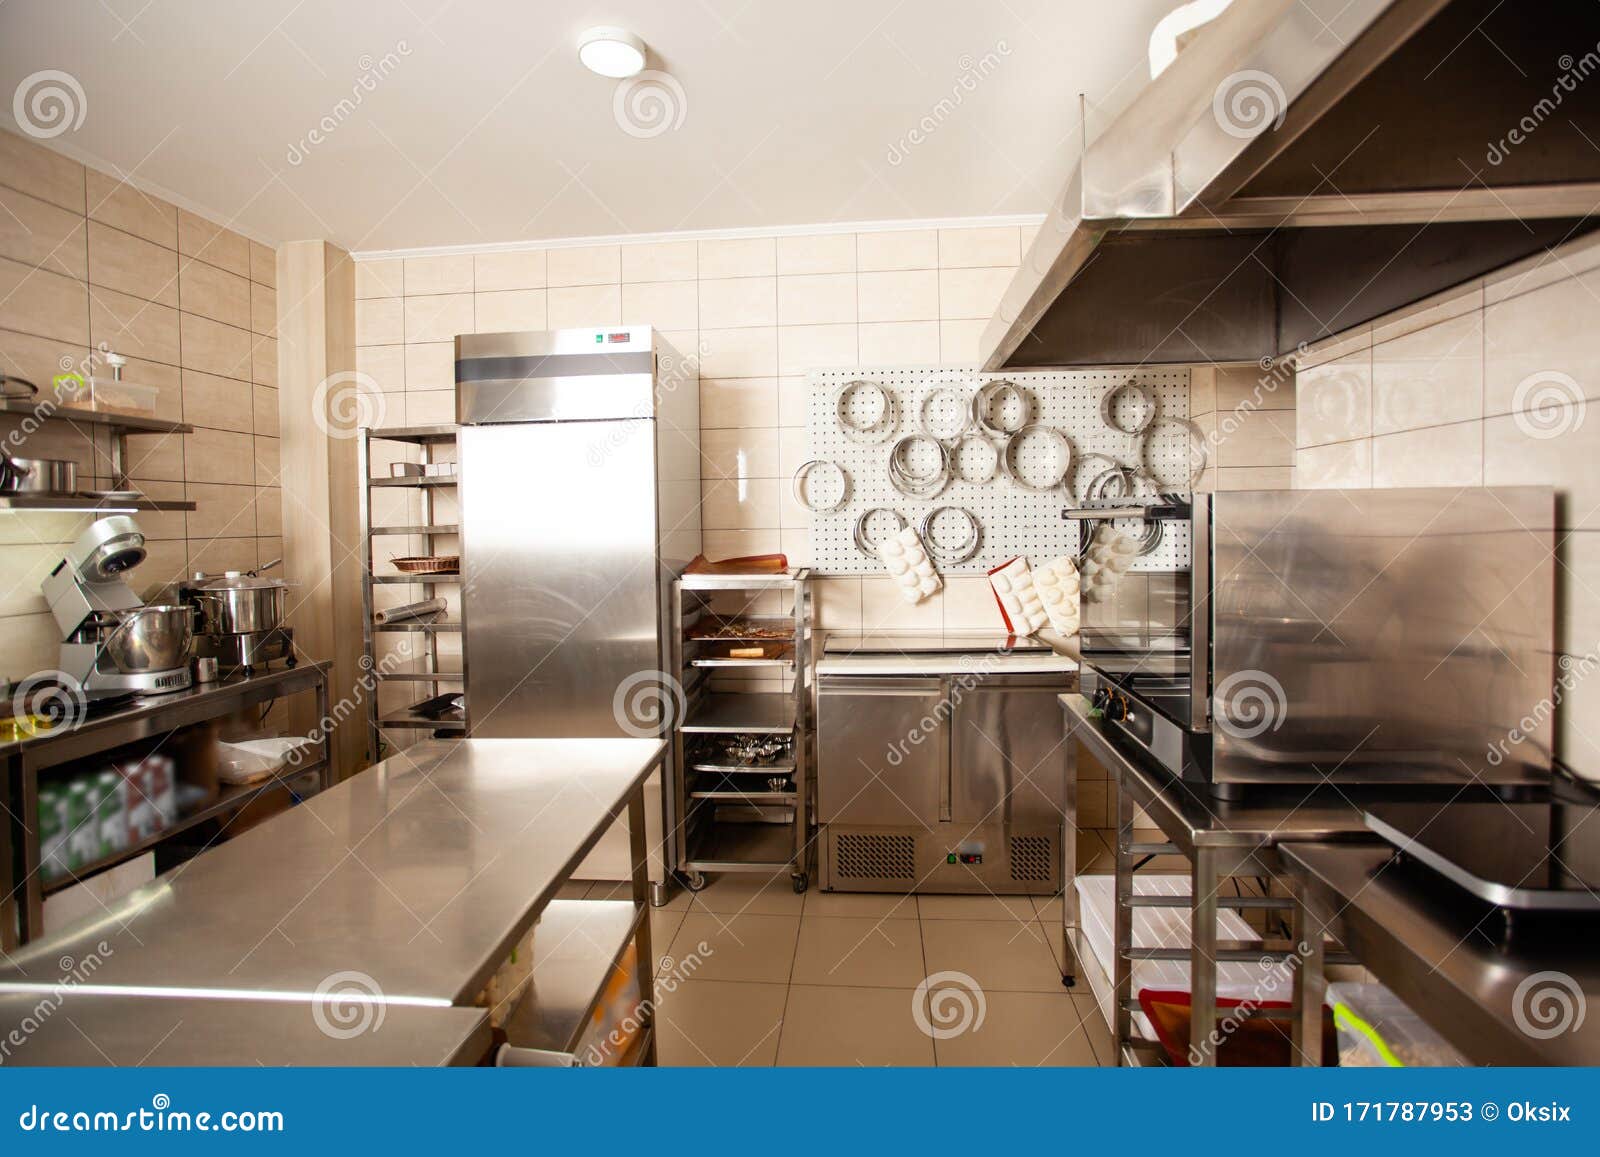 Professional Confectionery Kitchen Interior and Equipment Indoor ...